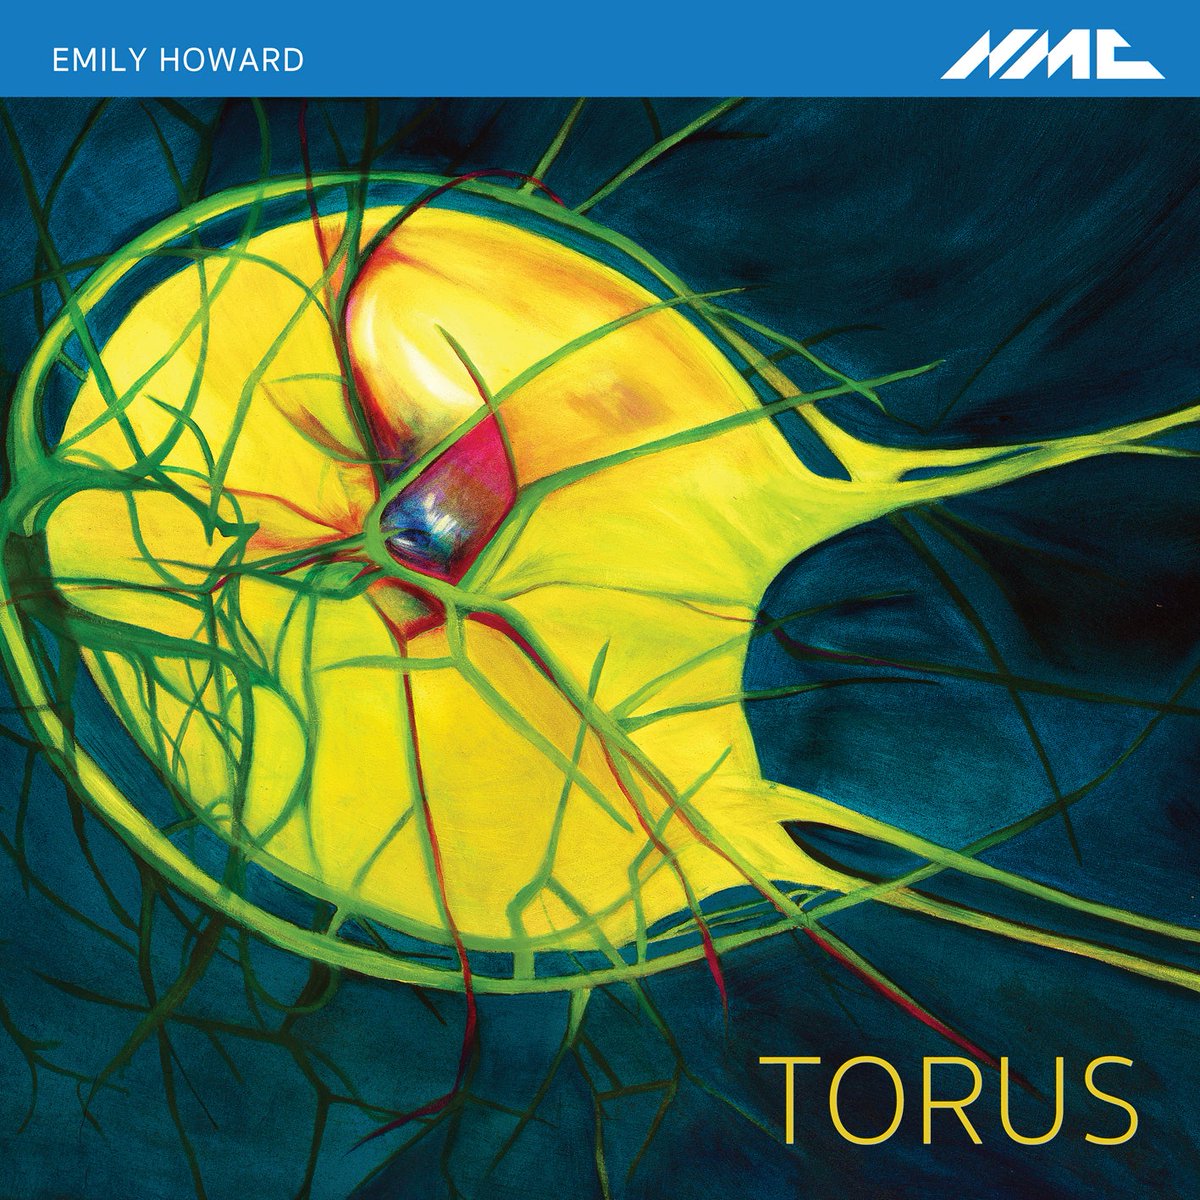 TORUS season is here! @EHowardComposer's sophomore release on @nmcrecordings dives into her series of Orchestral Geometries, pieces that allow the listener to explore pure mathematical forms as breathtaking, dramatic musical landscapes. nmc-recordings.myshopify.com/products/emily…